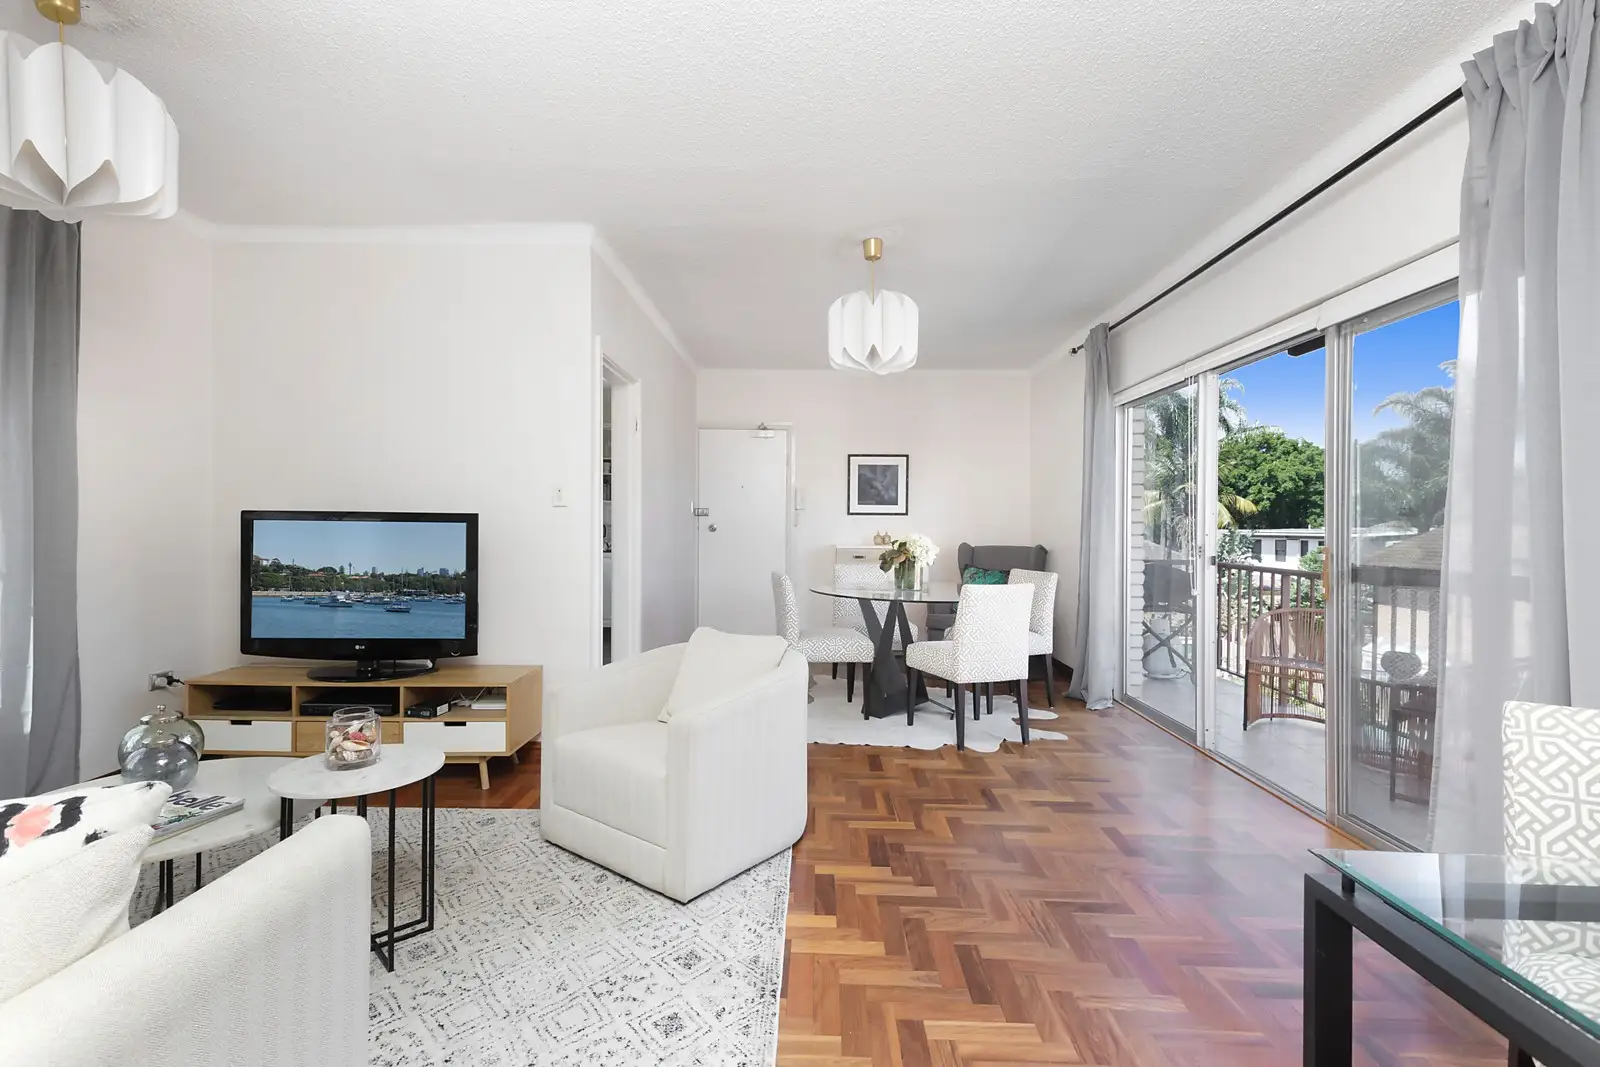 Photo #1: 3/27 William Street, Rose Bay - Sold by Sydney Sotheby's International Realty